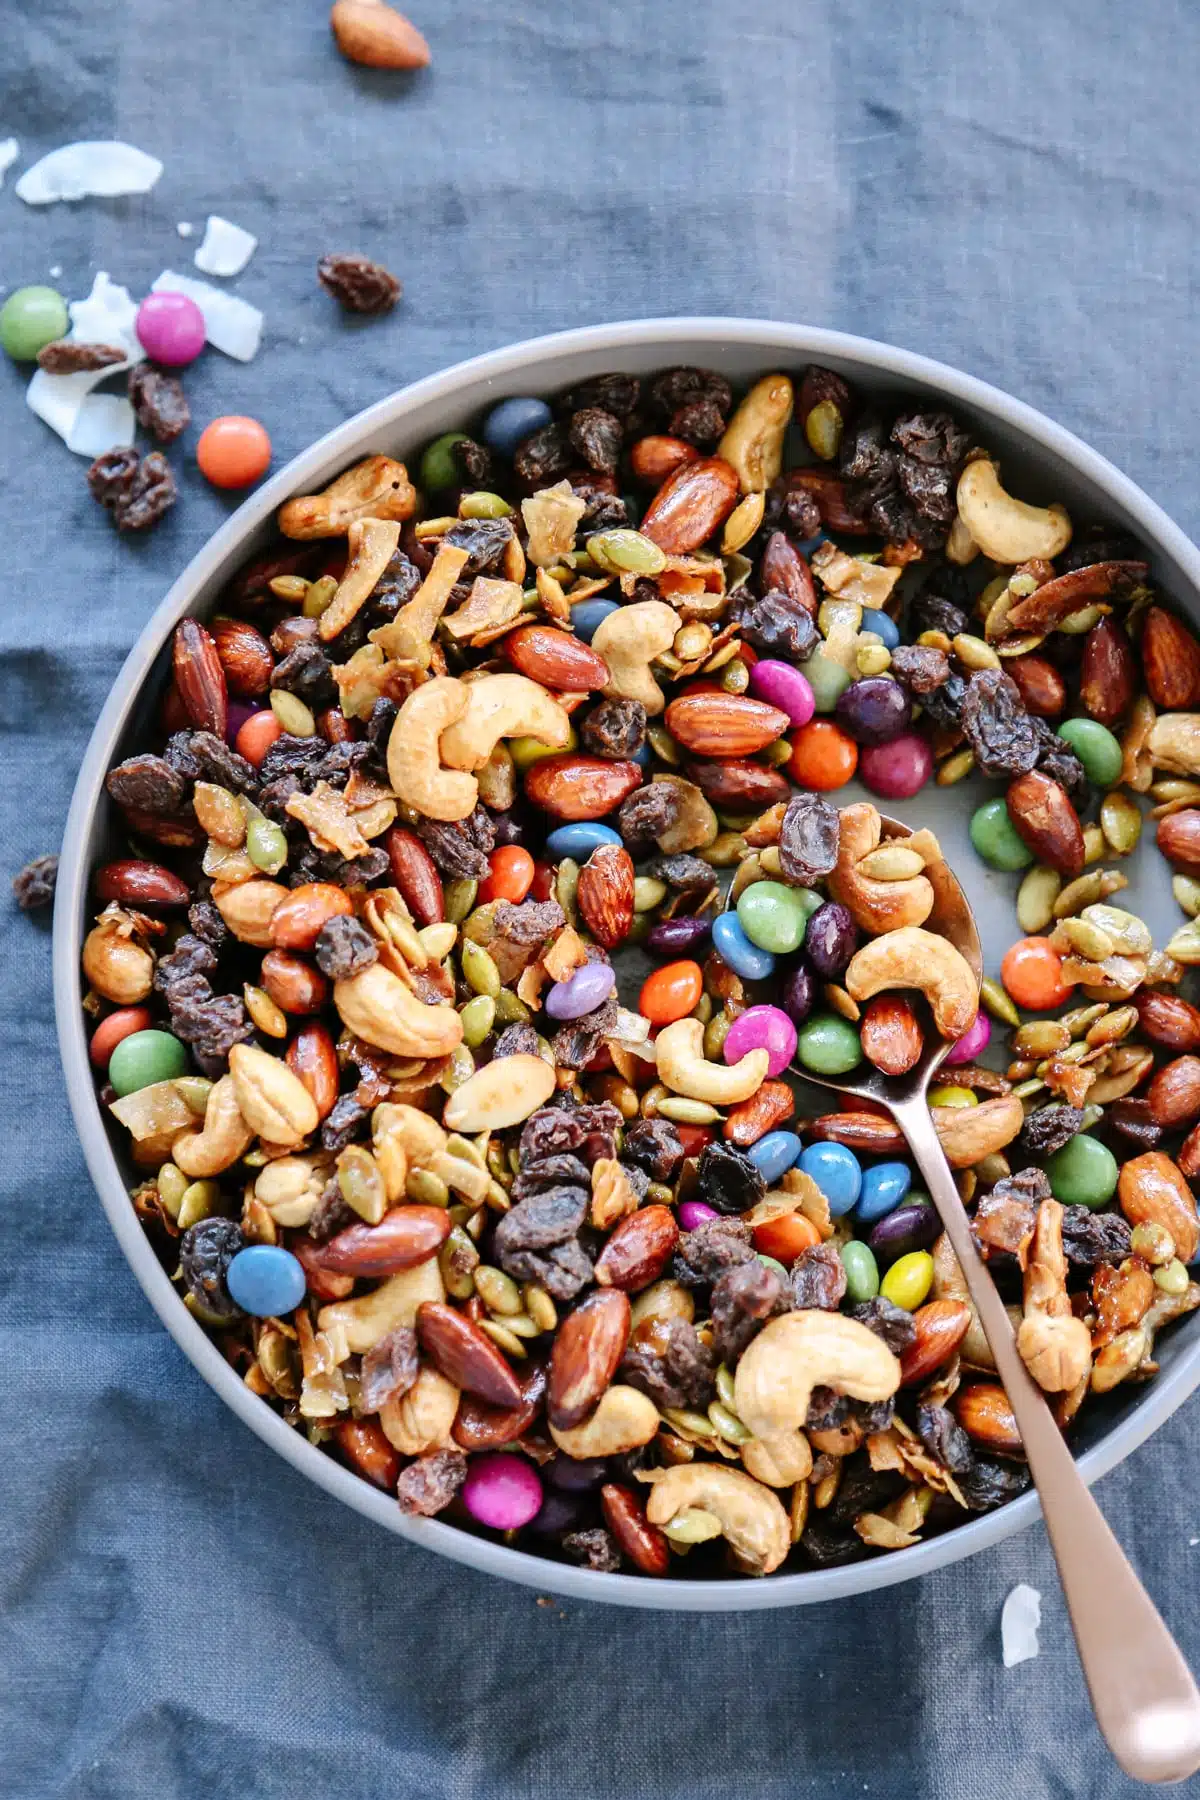 A bowl of trail mix with cashews, almonds, raisins, m&m's, pistachios, and walnuts is placed on a dark grey fabric surface.